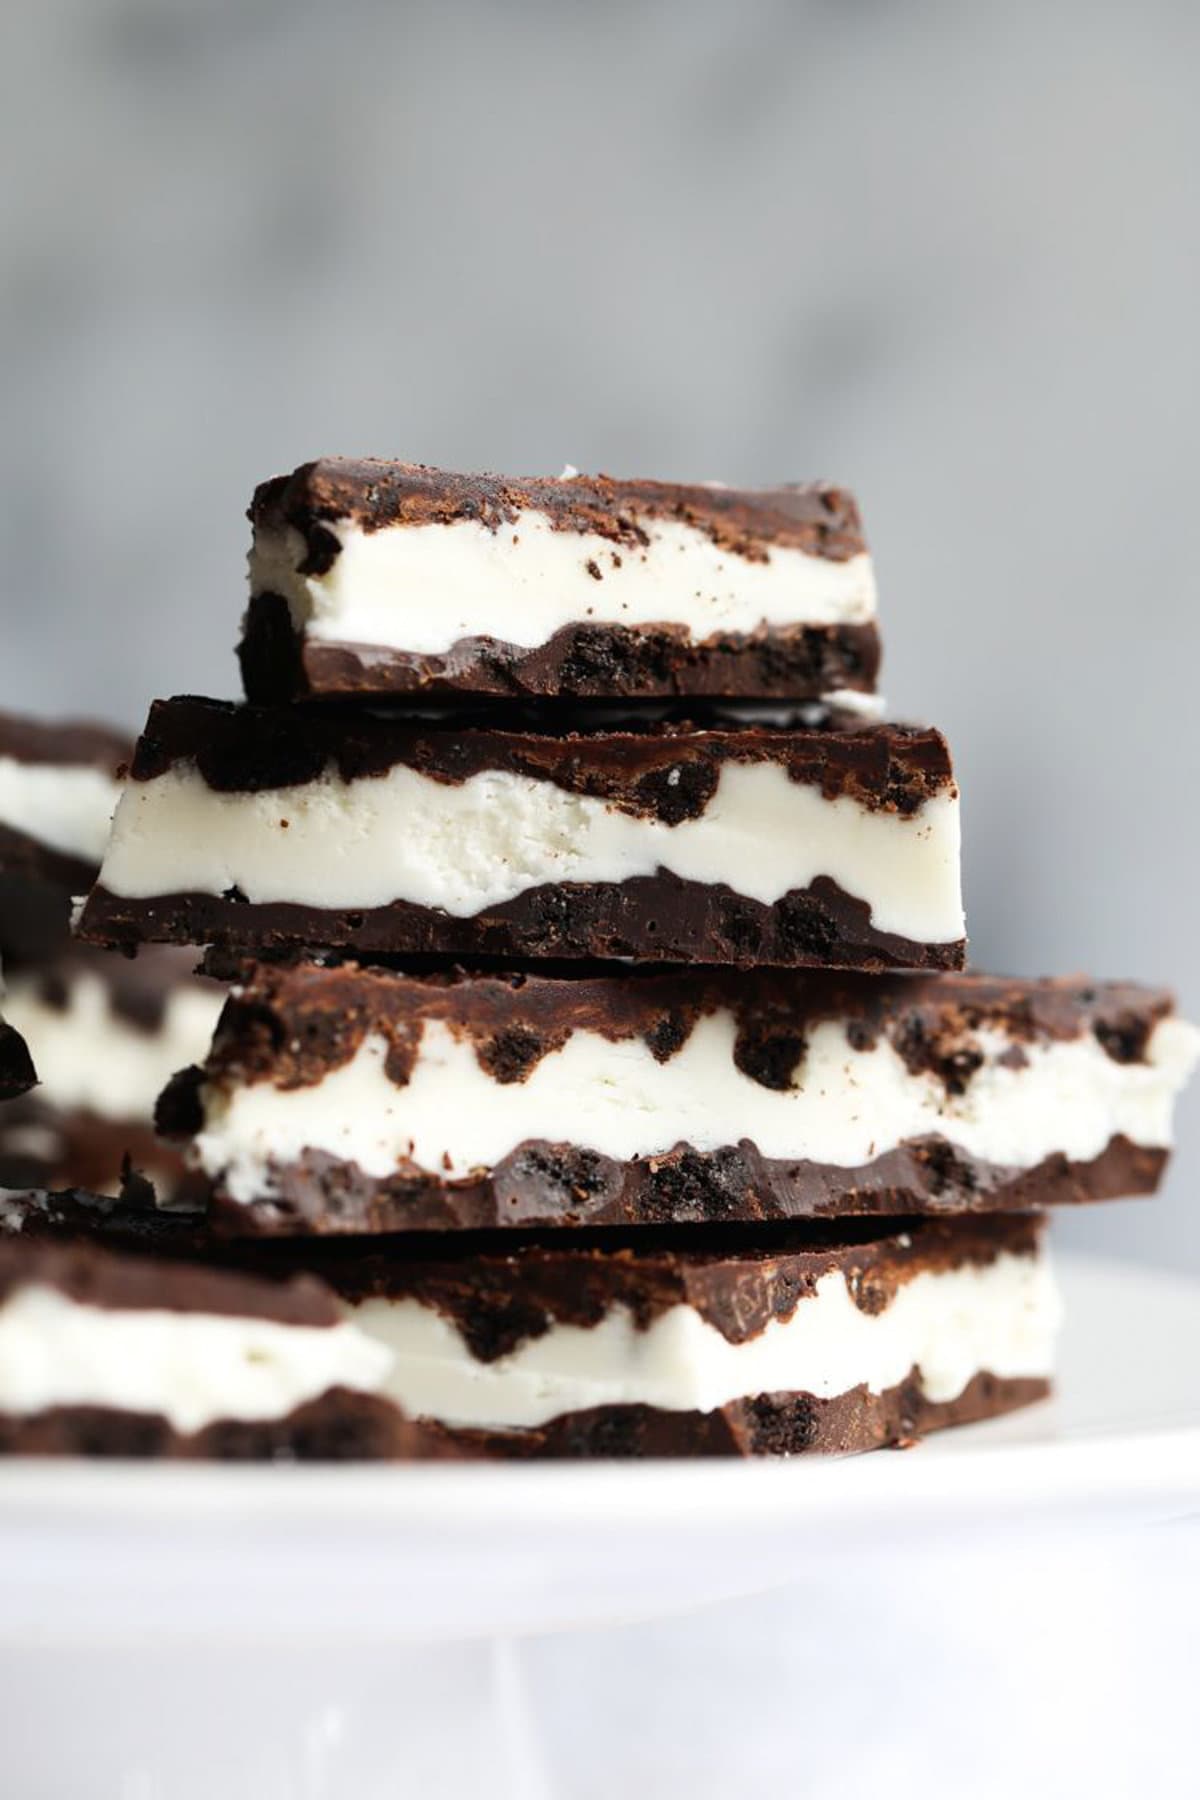 Oreo cookie bark served to eat